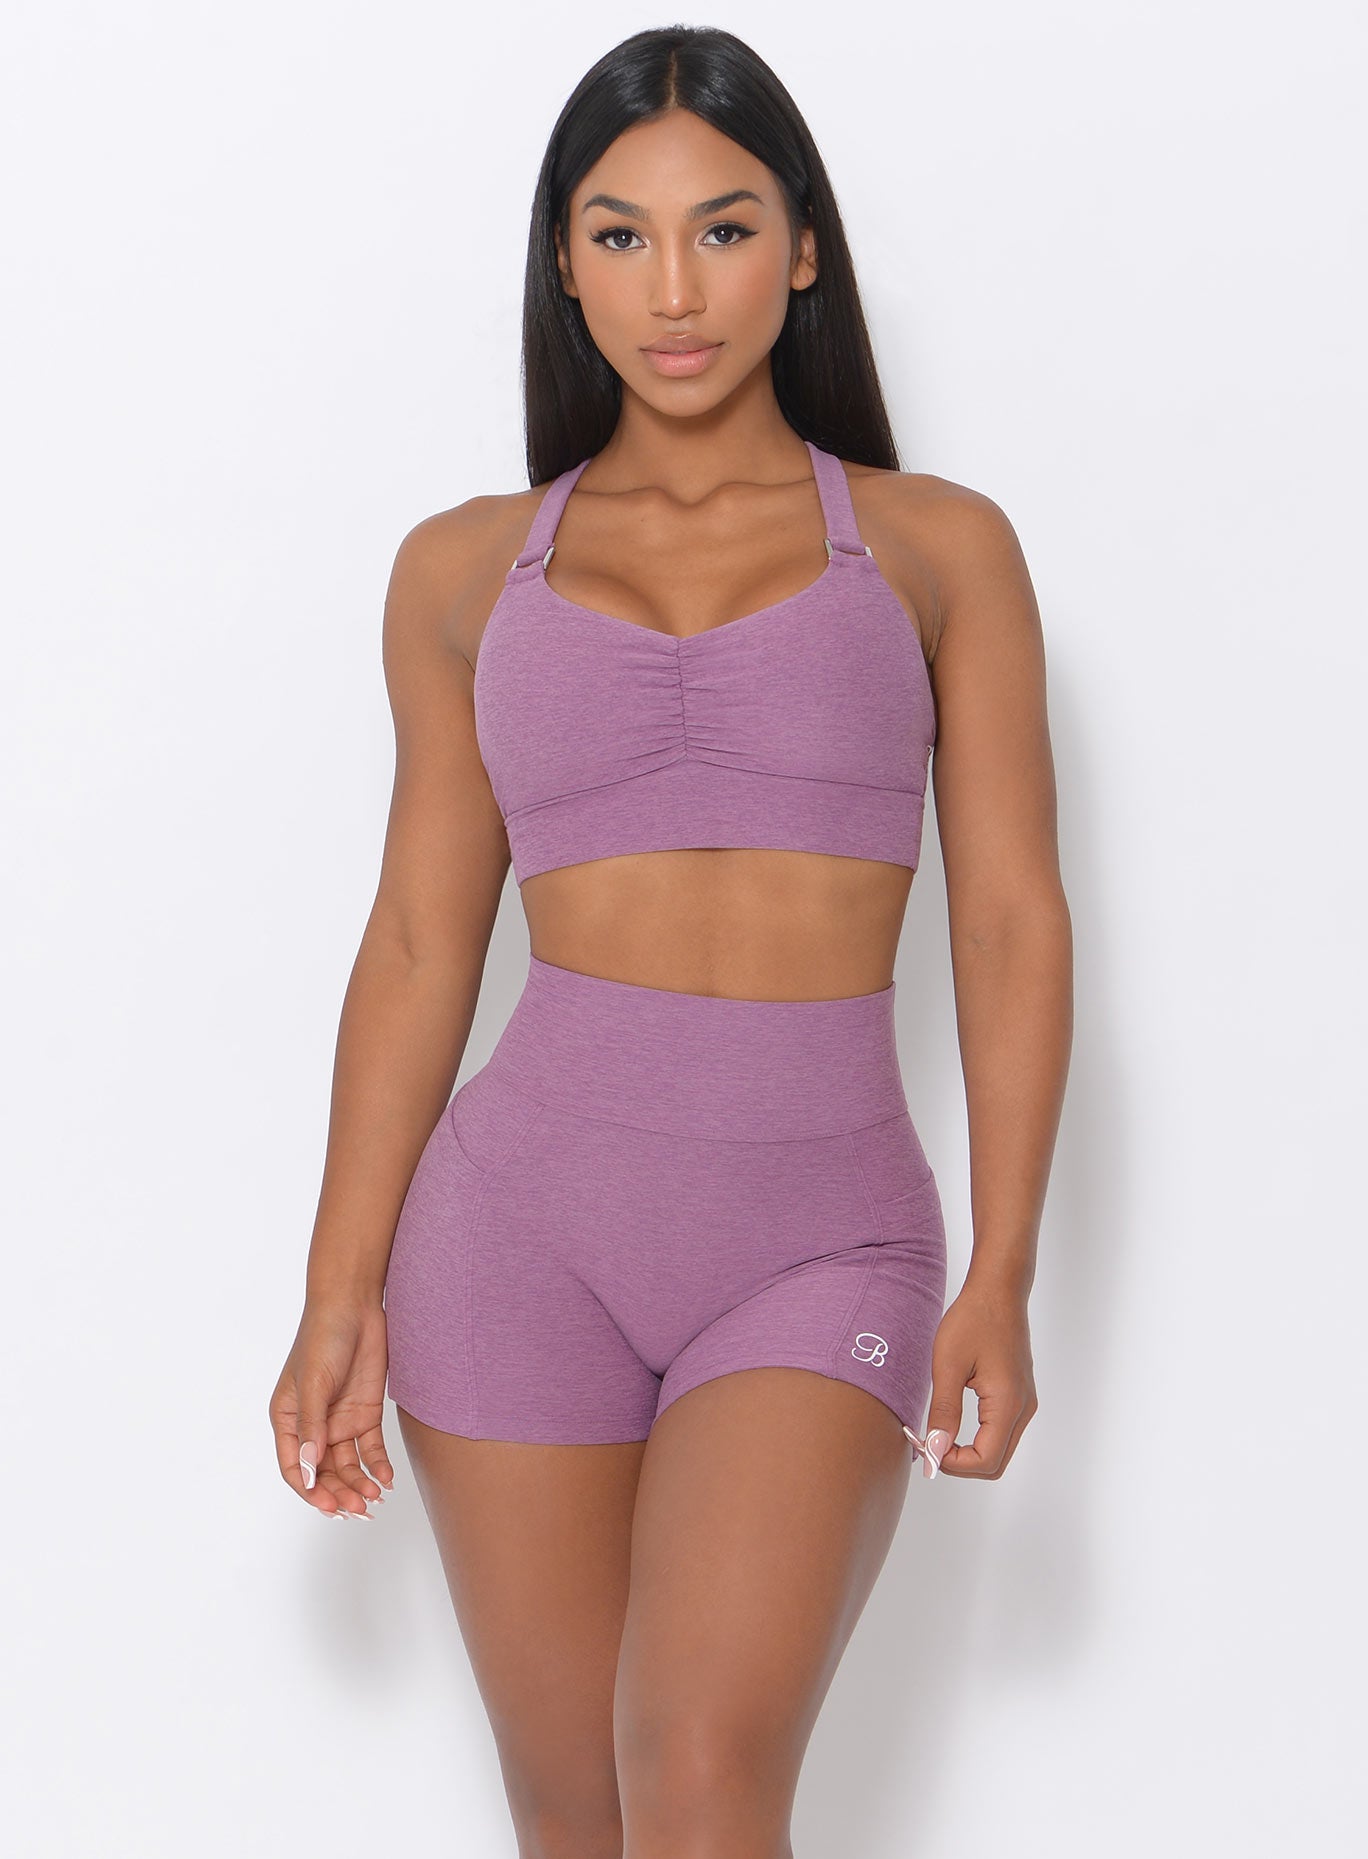 Model facing forward wearing our perfection sports bra in lavender and a matching shorts